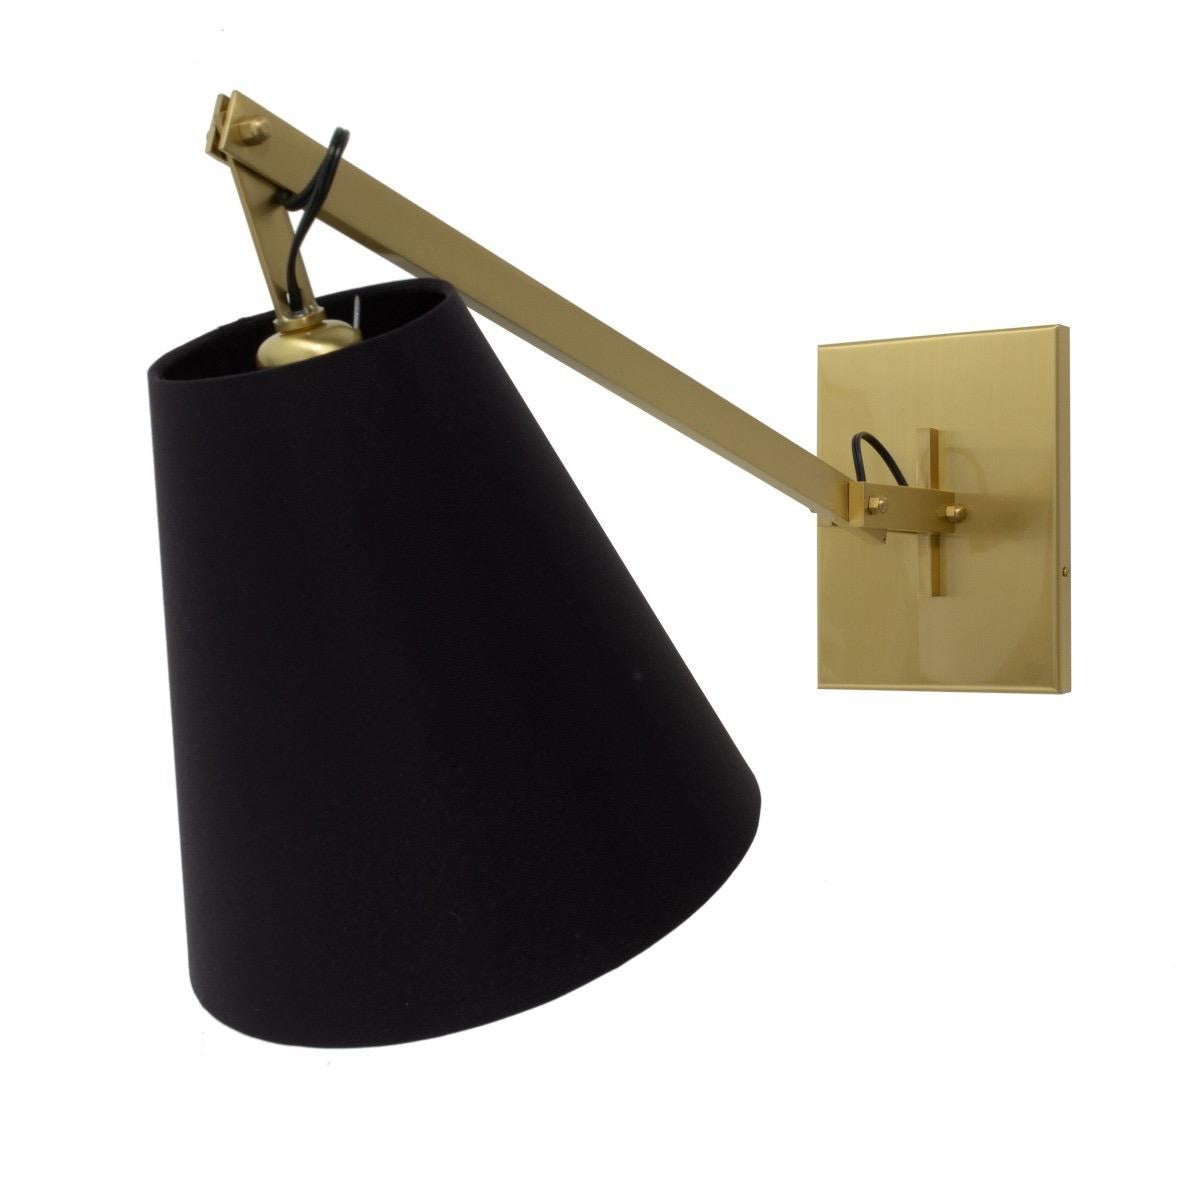 A pair of darkened brass wall lamps / sconces with black linen shades. 

Wired for US; each light takes a standard US bulb, 60 watts max.

Dimensions: 6.5